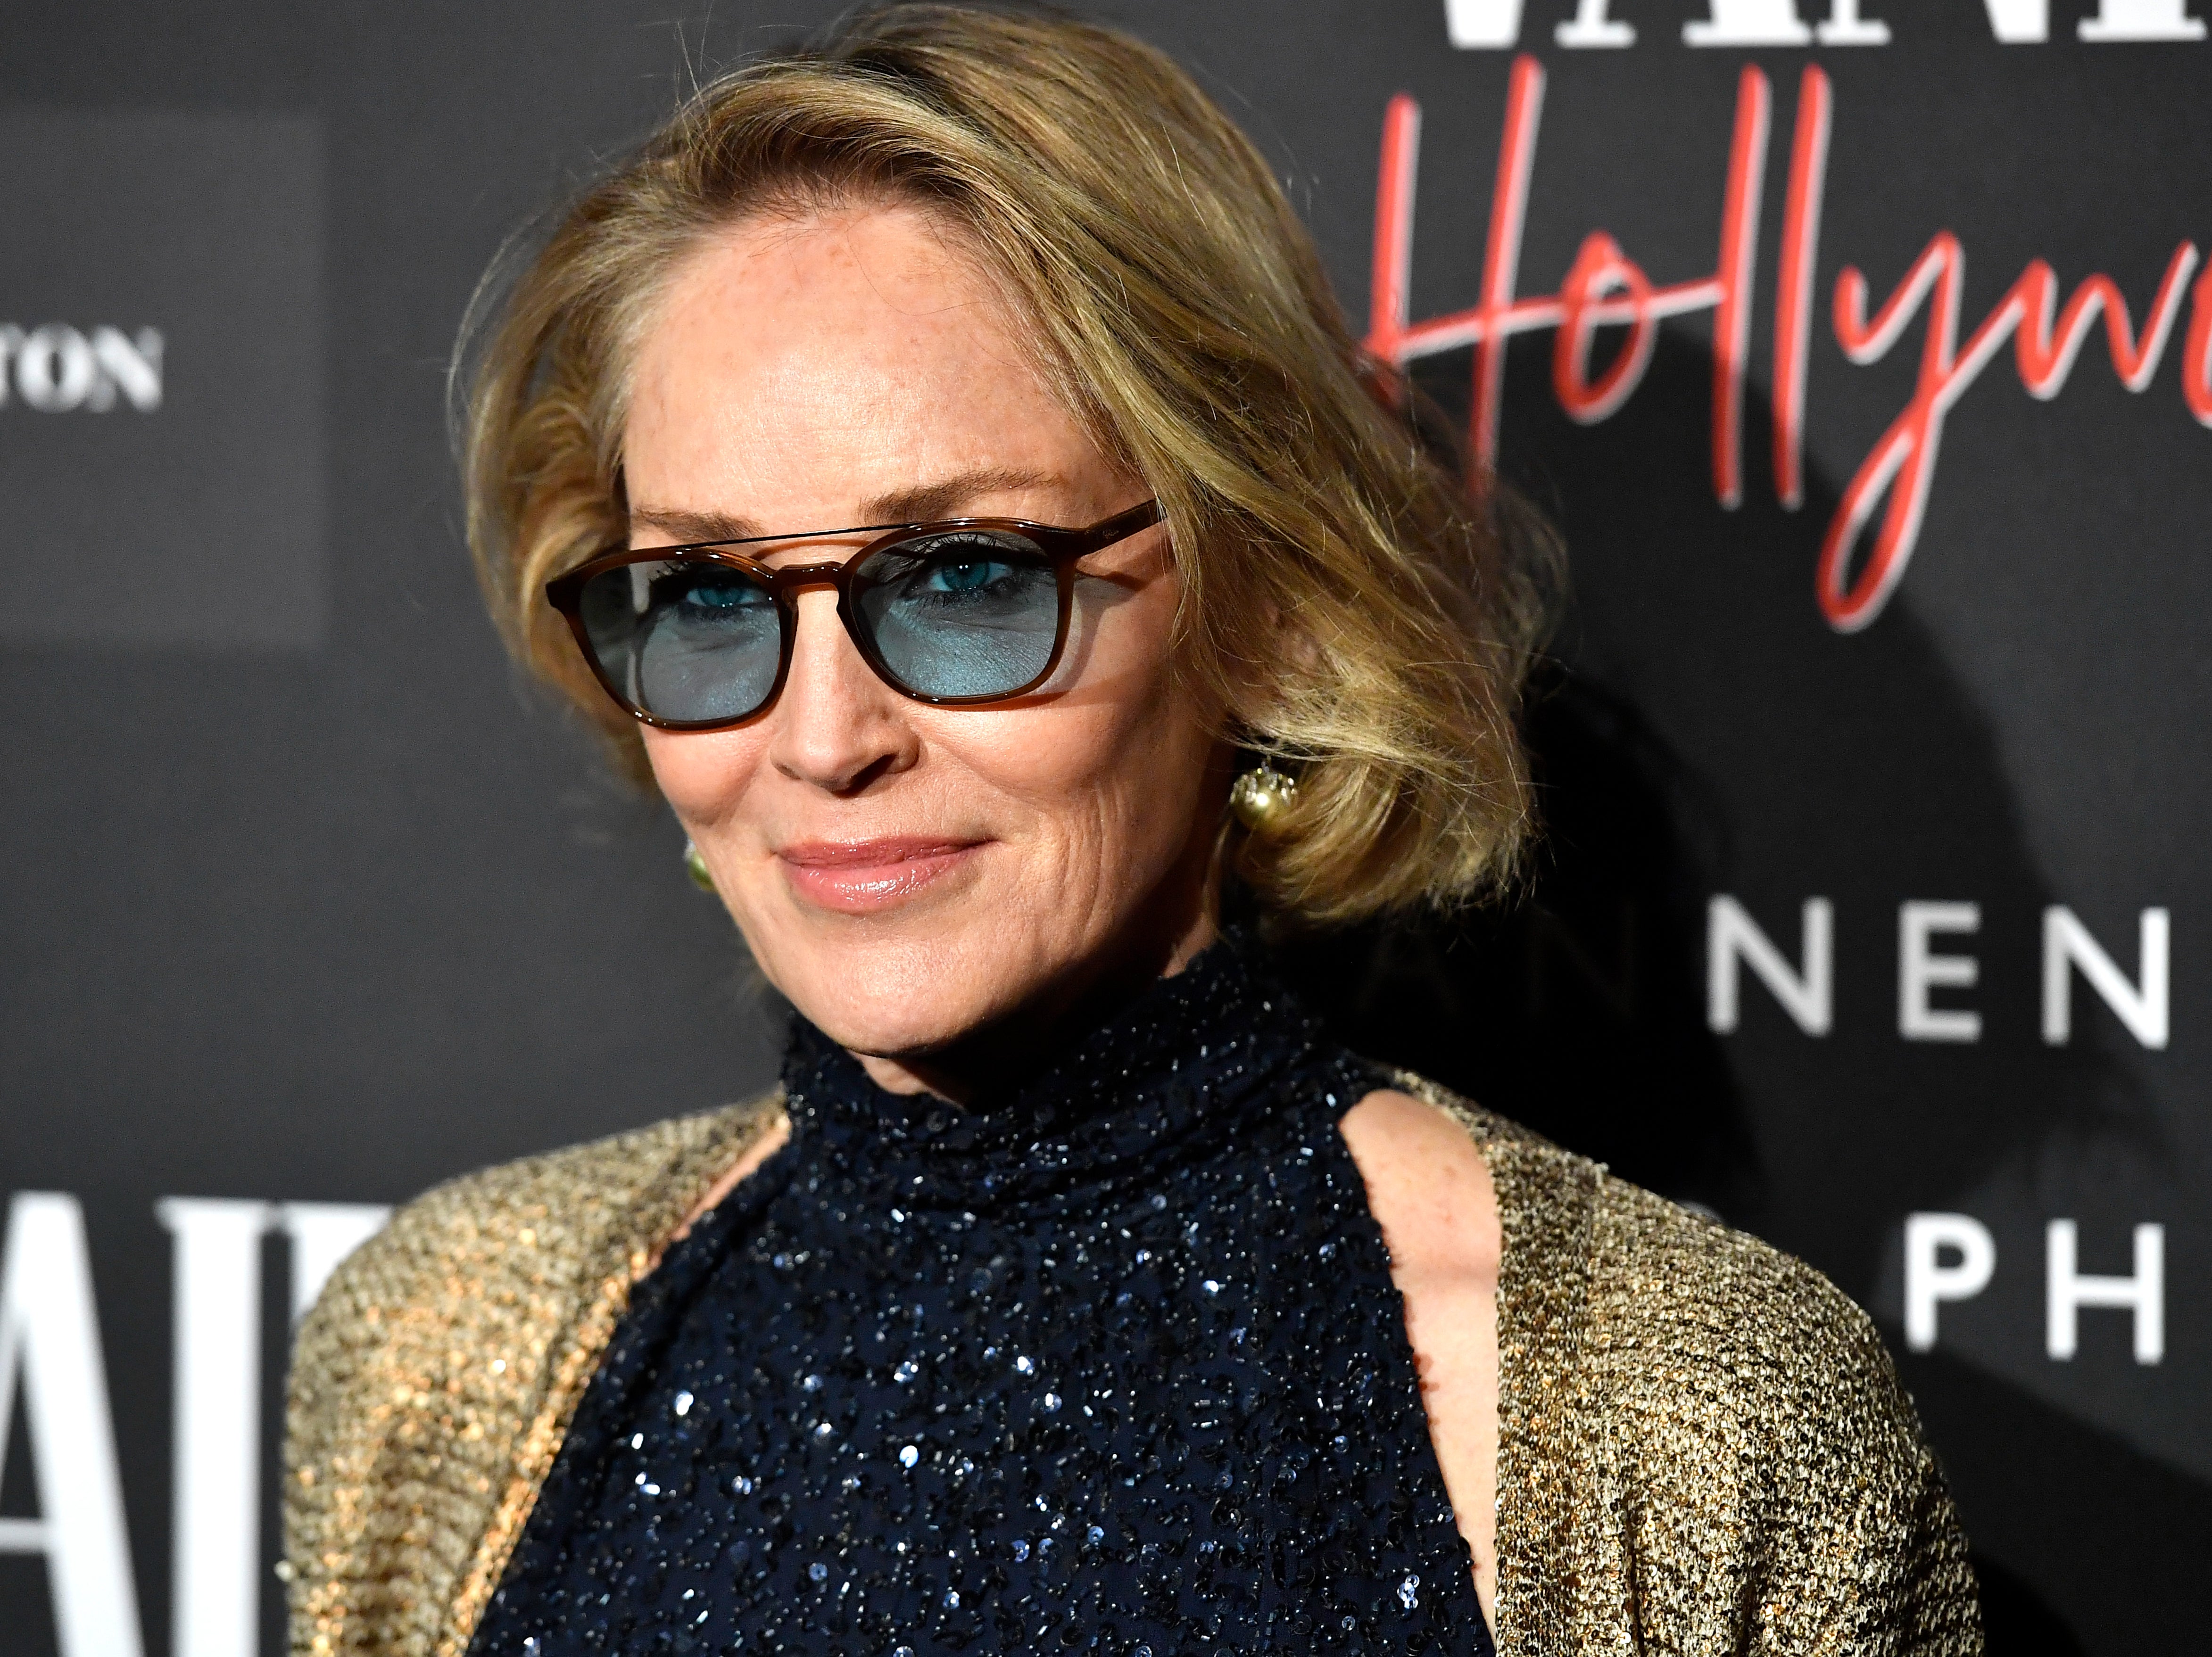 Sharon Stone at an event on 4 February 2020 in Century City, California